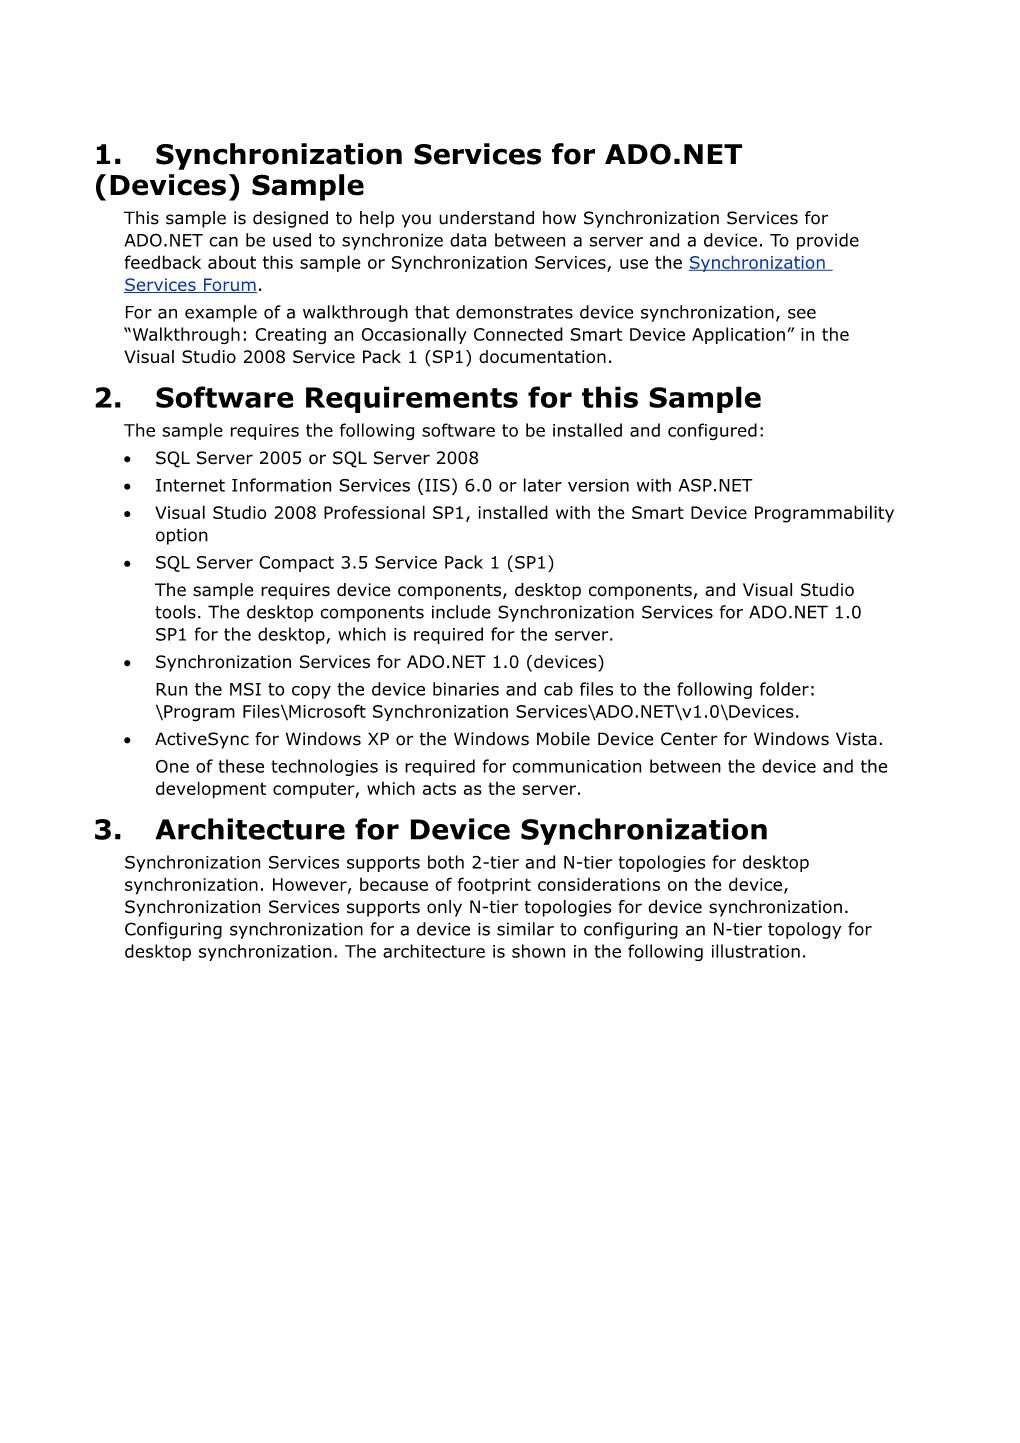 Synchronization Services for ADO.NET (Devices) Sample